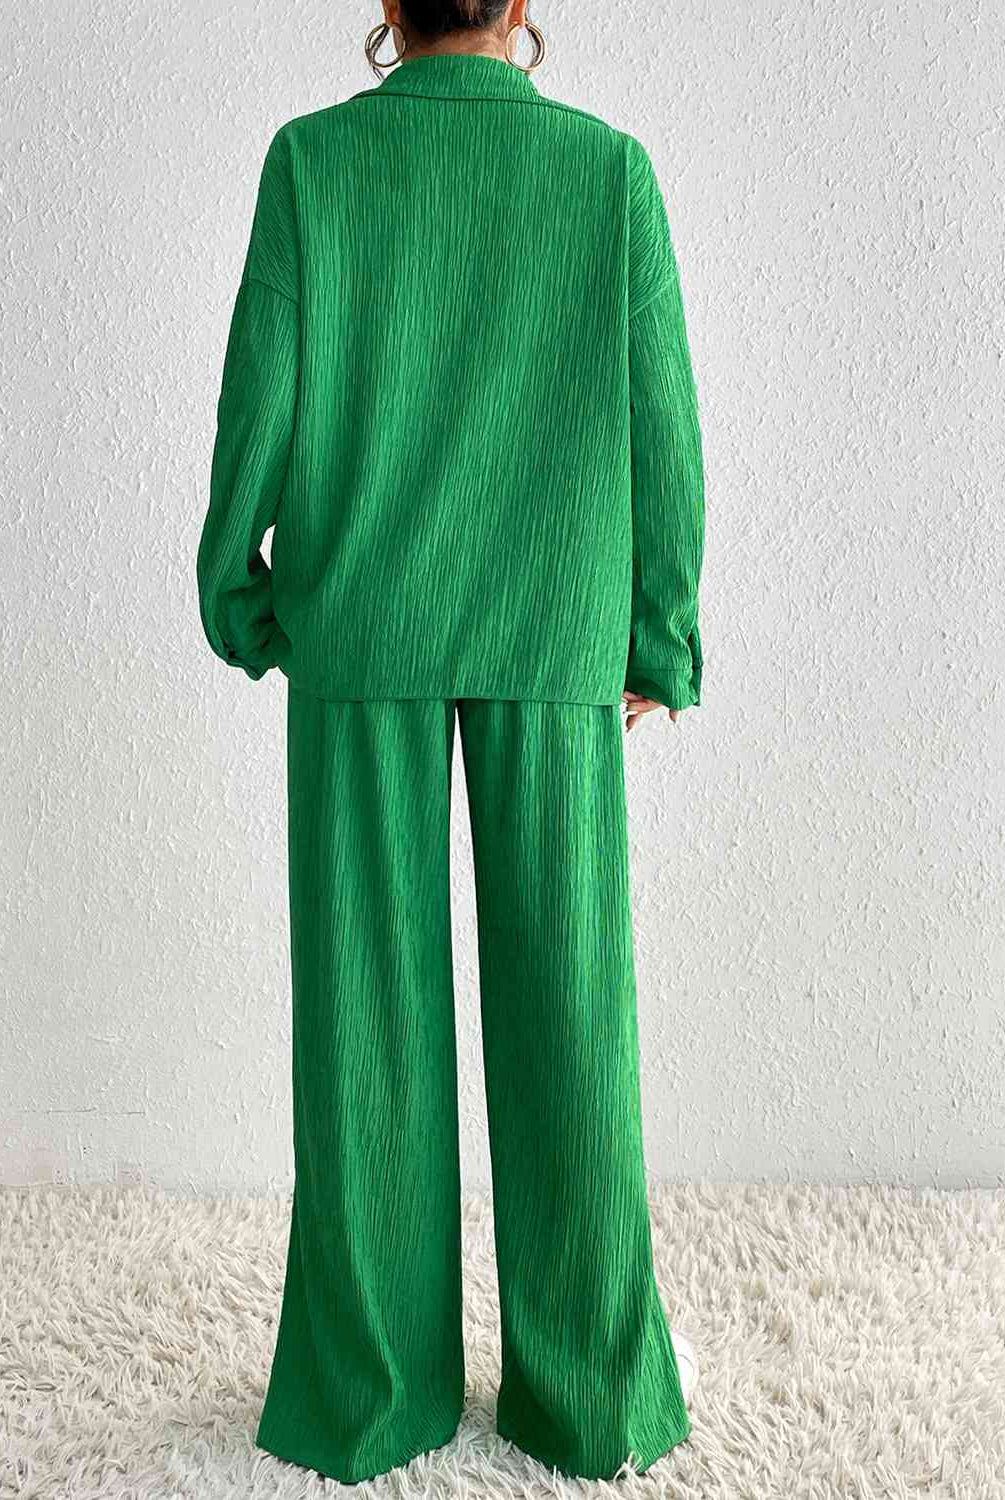 Sea Green Not Too Old For Fairytales Collared Neck Shirt and Slit Pants Set New Year Looks